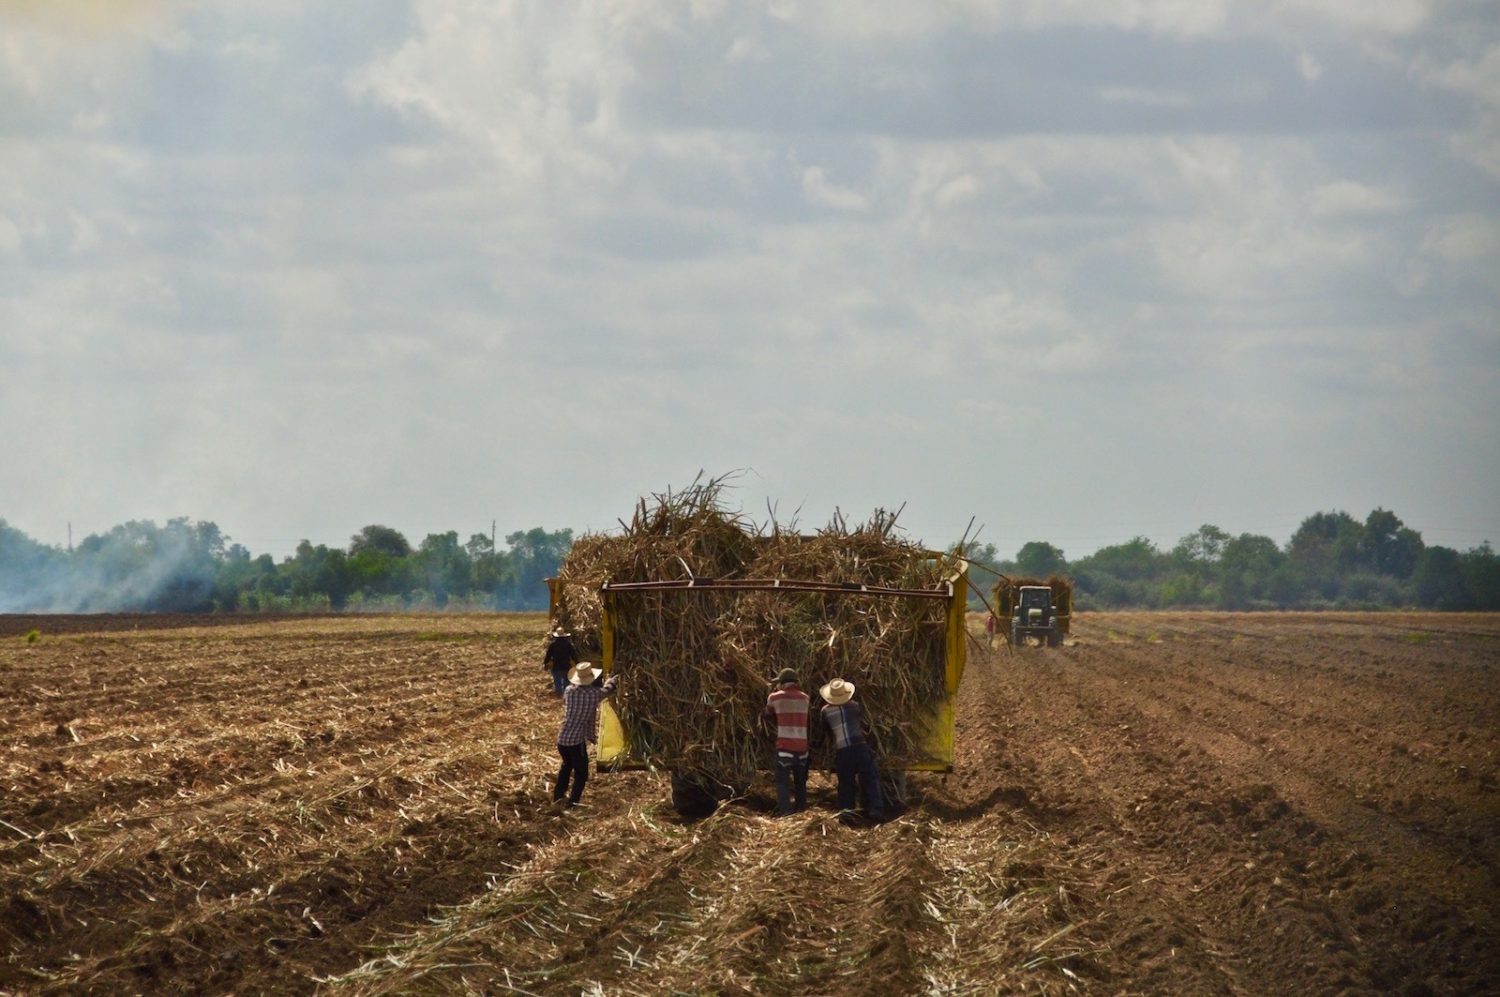 Louisiana sugarcane workers sue Lowry Farms for wage theft, breach of contract